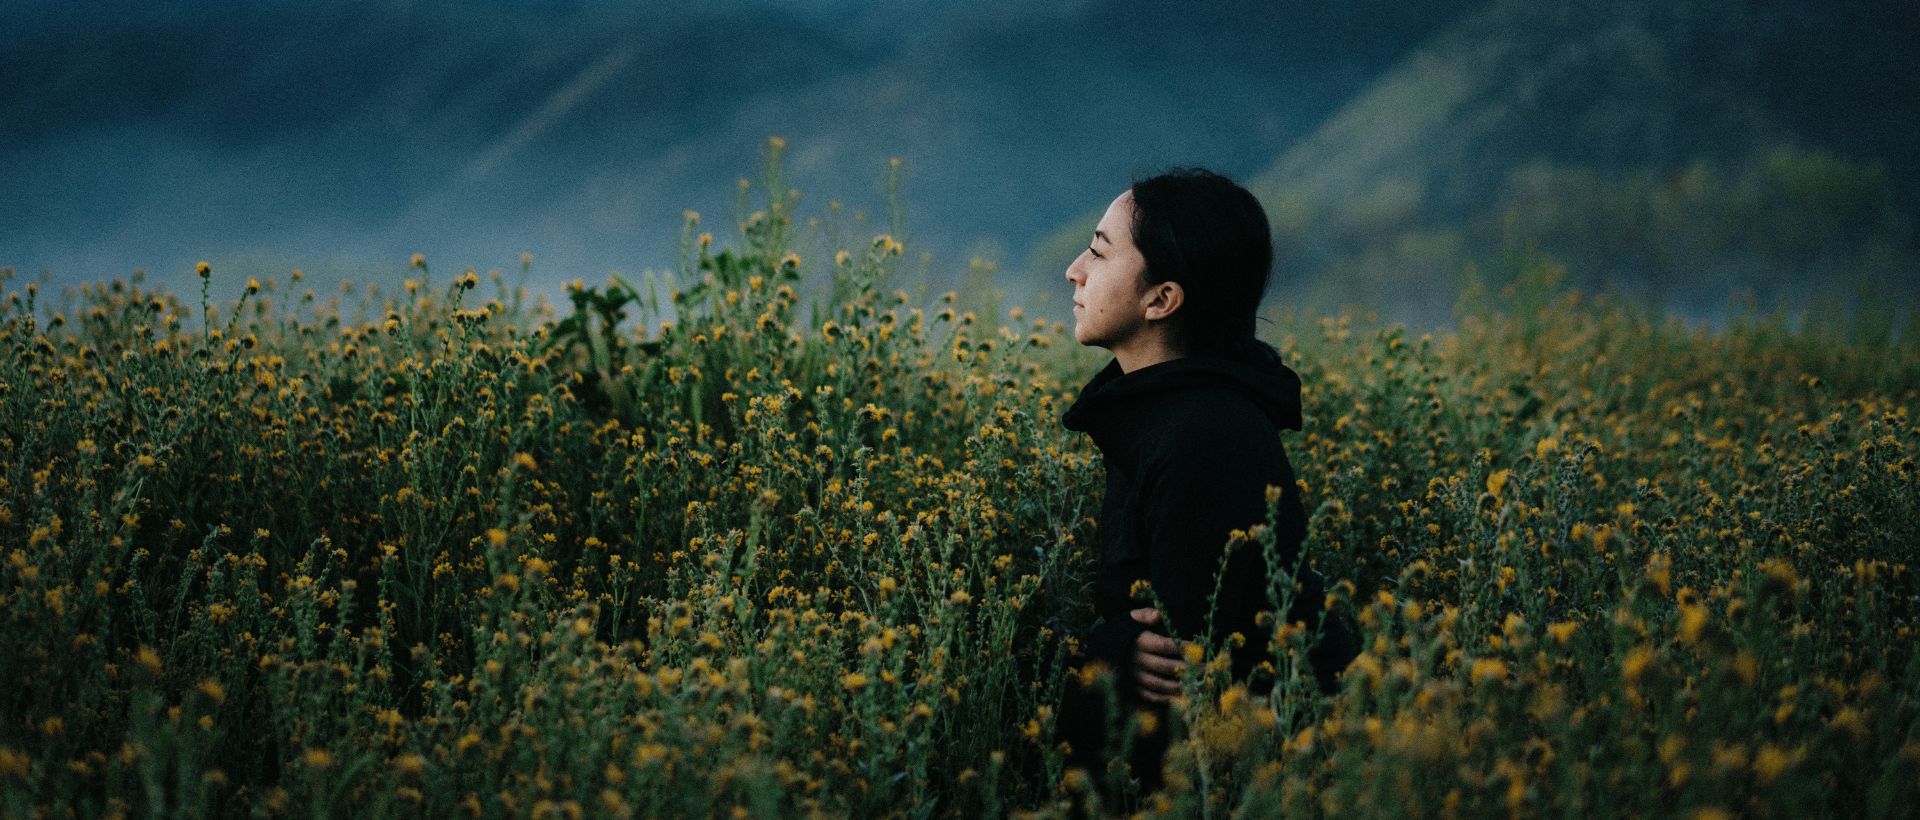 a woman standing in a field of yellow flowers.